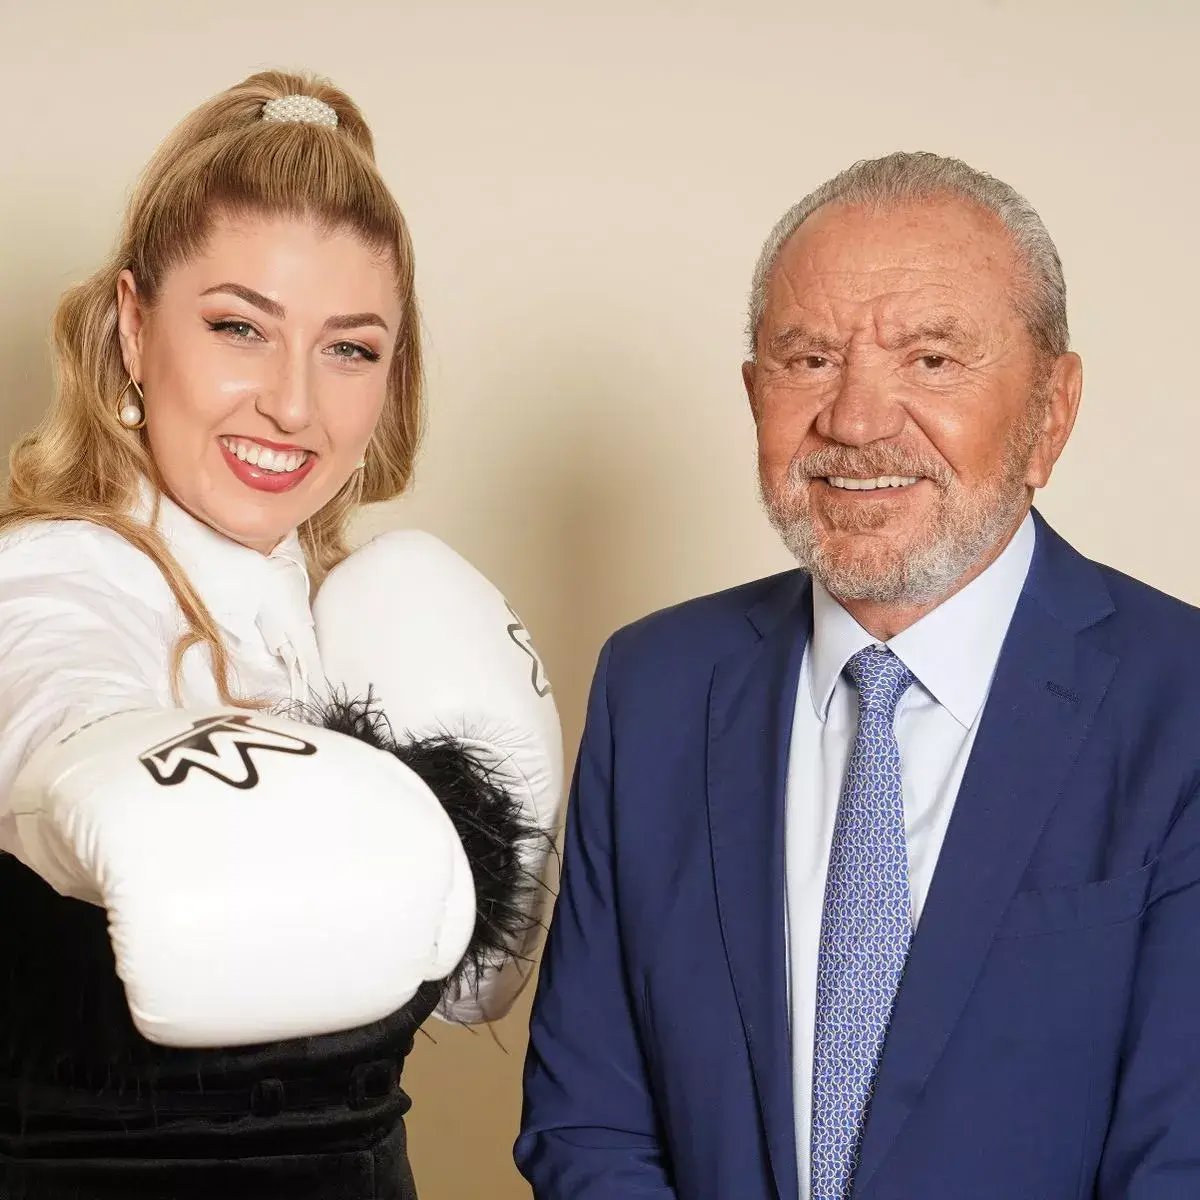 Bronx Boxing is a client of LoudLocal, this image shows Marnie Swindells the founder of Bronx wearing a white shirt and white boxing gloves stood next to Lord Allan Sugar who is wearing a blue suit after she won the BBC's Apprentice.